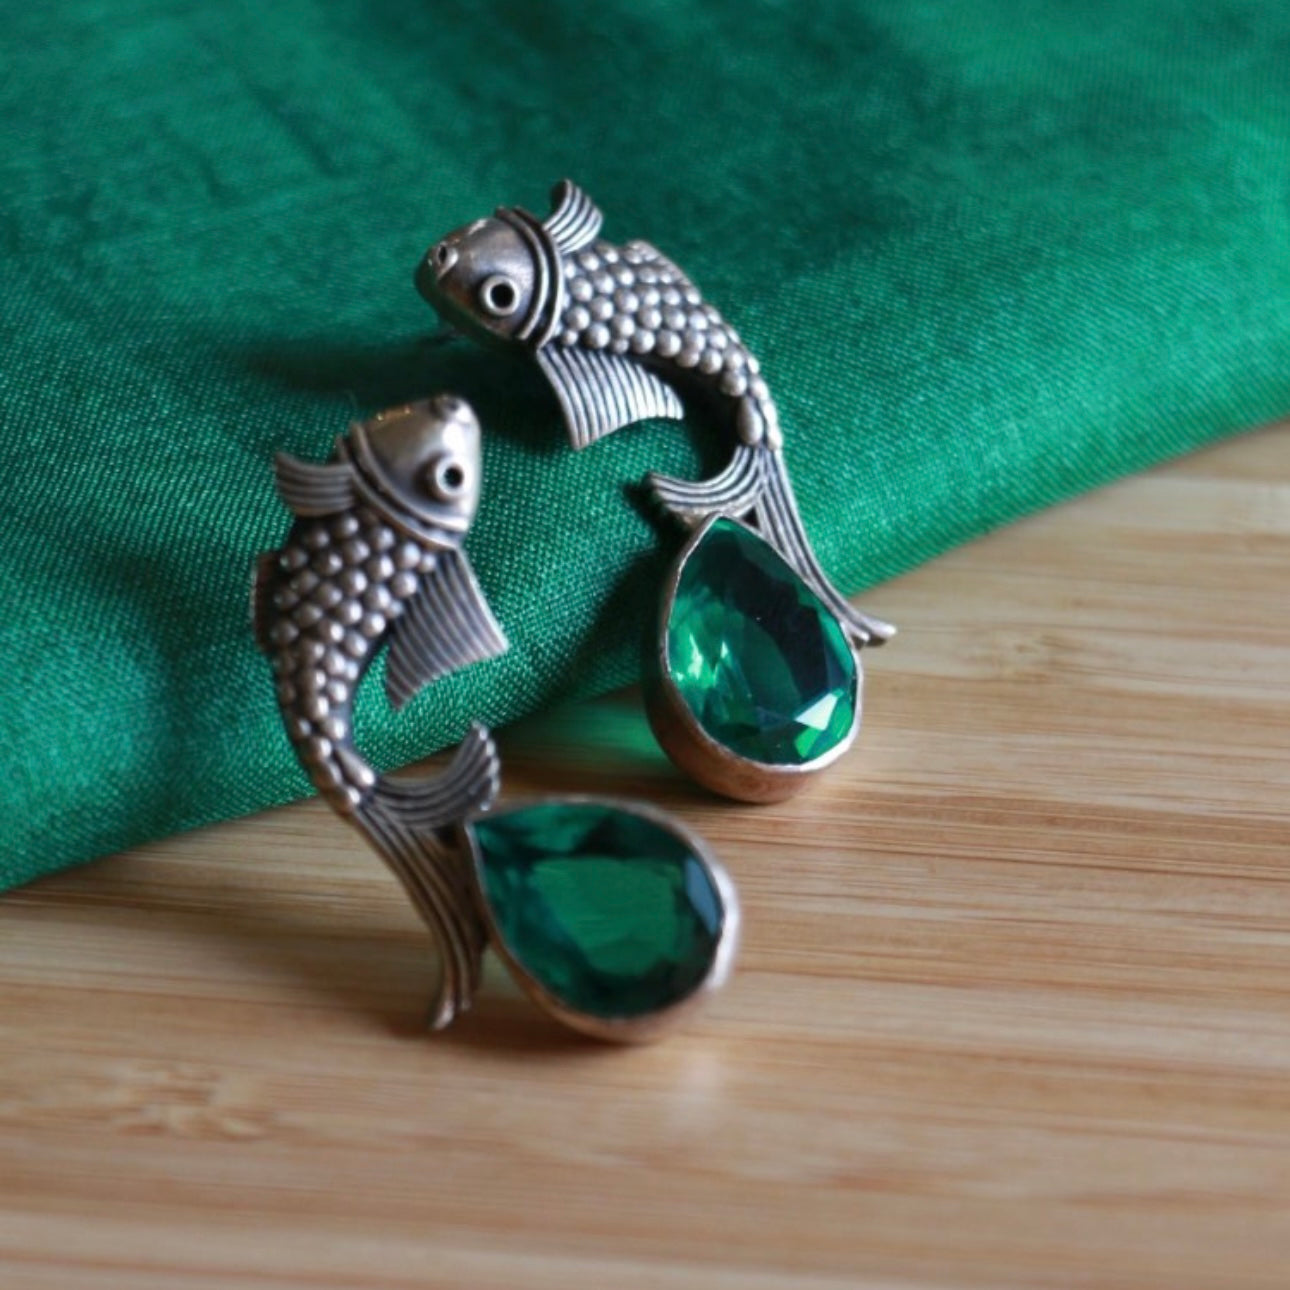 Beautiful Ira fish motif earrings. Handcrafted in 92.5 sterling silver with semi precious stone drop. Works great with smart casuals and workwear. 